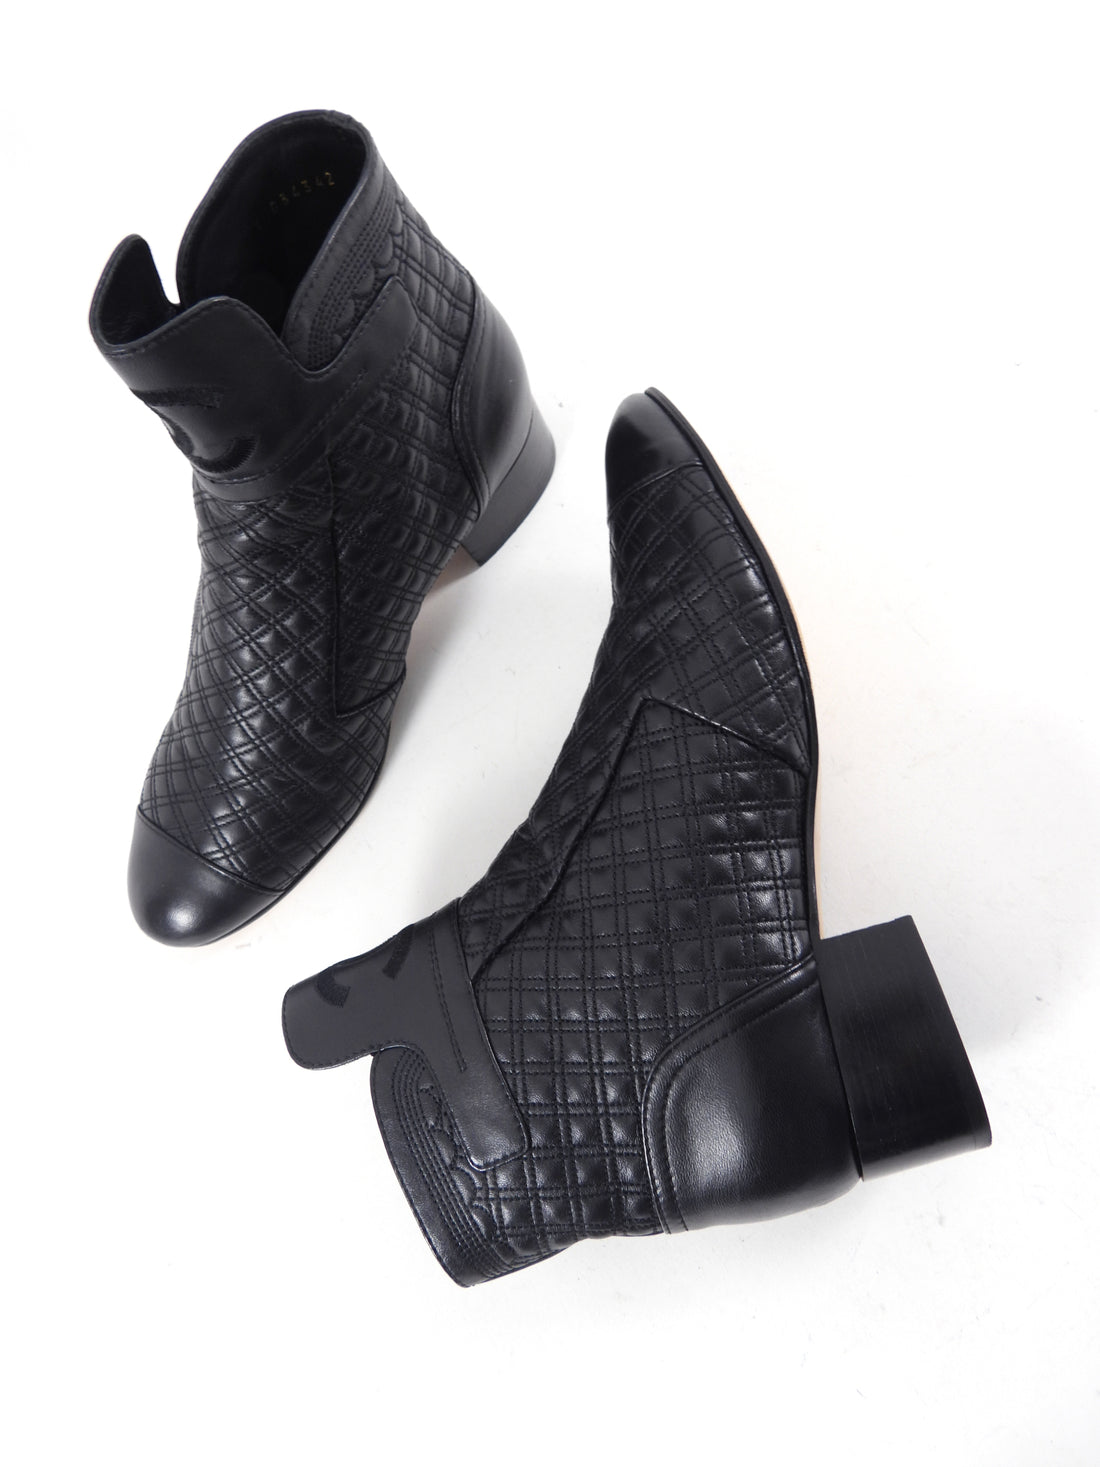 Chanel Black Quilted Ankle Boots with Goldtone Detail - USA 9